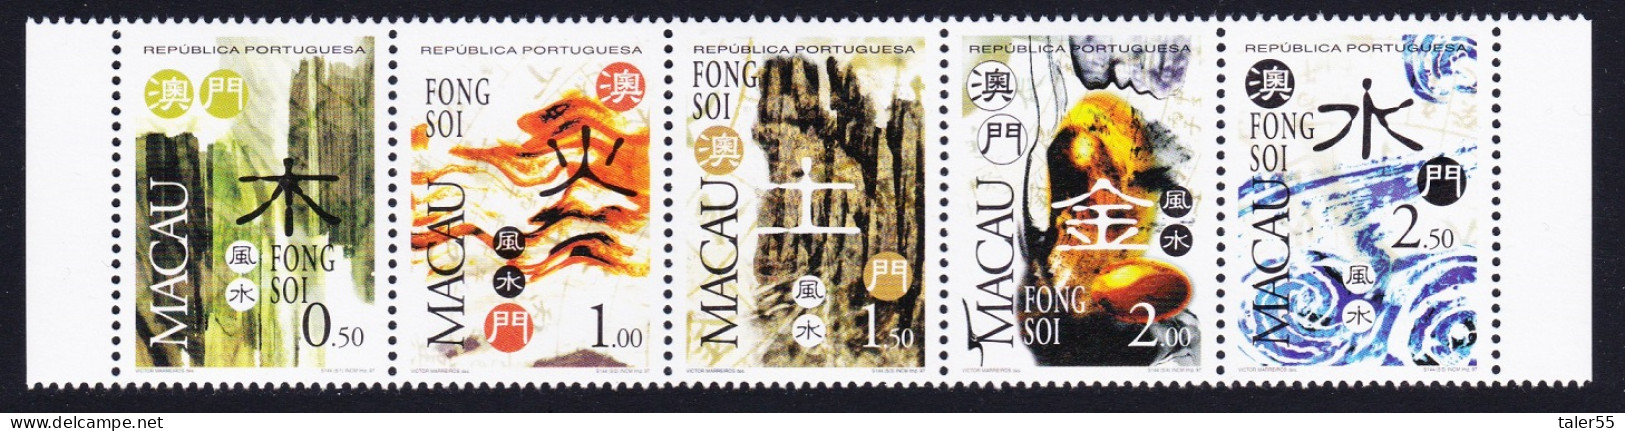 Macao Macau Feng Shui The Five Elements Strip Of 5 1997 MNH SG#1012-1016 MI#937-941 Sc#902a - Unused Stamps